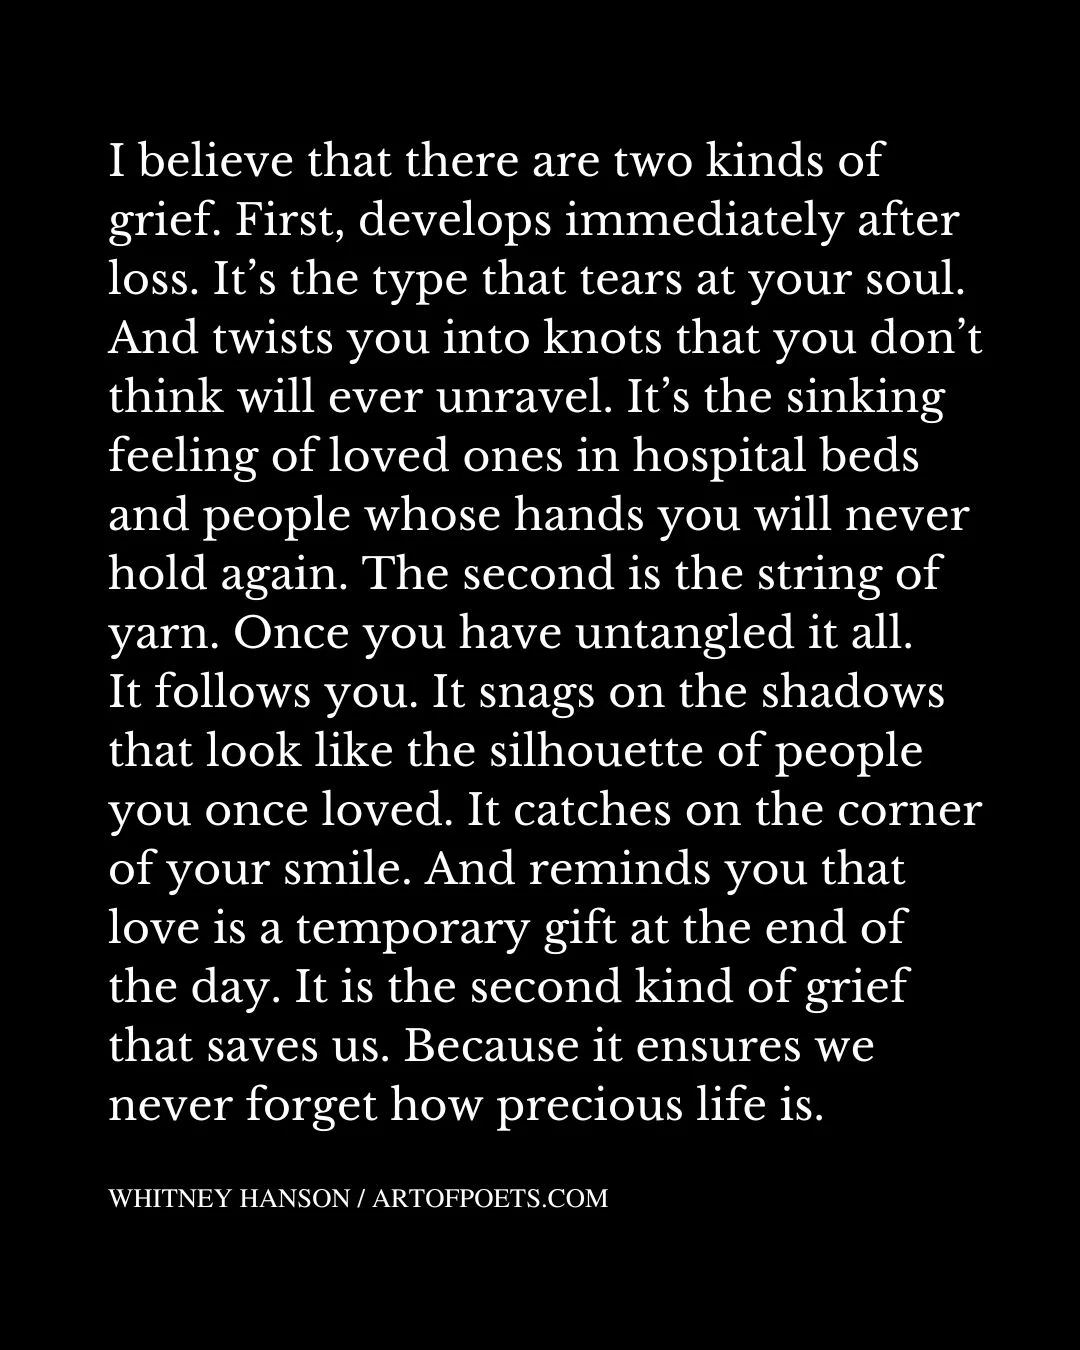 I believe that there are two kinds of grief. First develops immediately after loss. Its the type that tears at your soul. And twists you into knots that you dont think will ever unravel